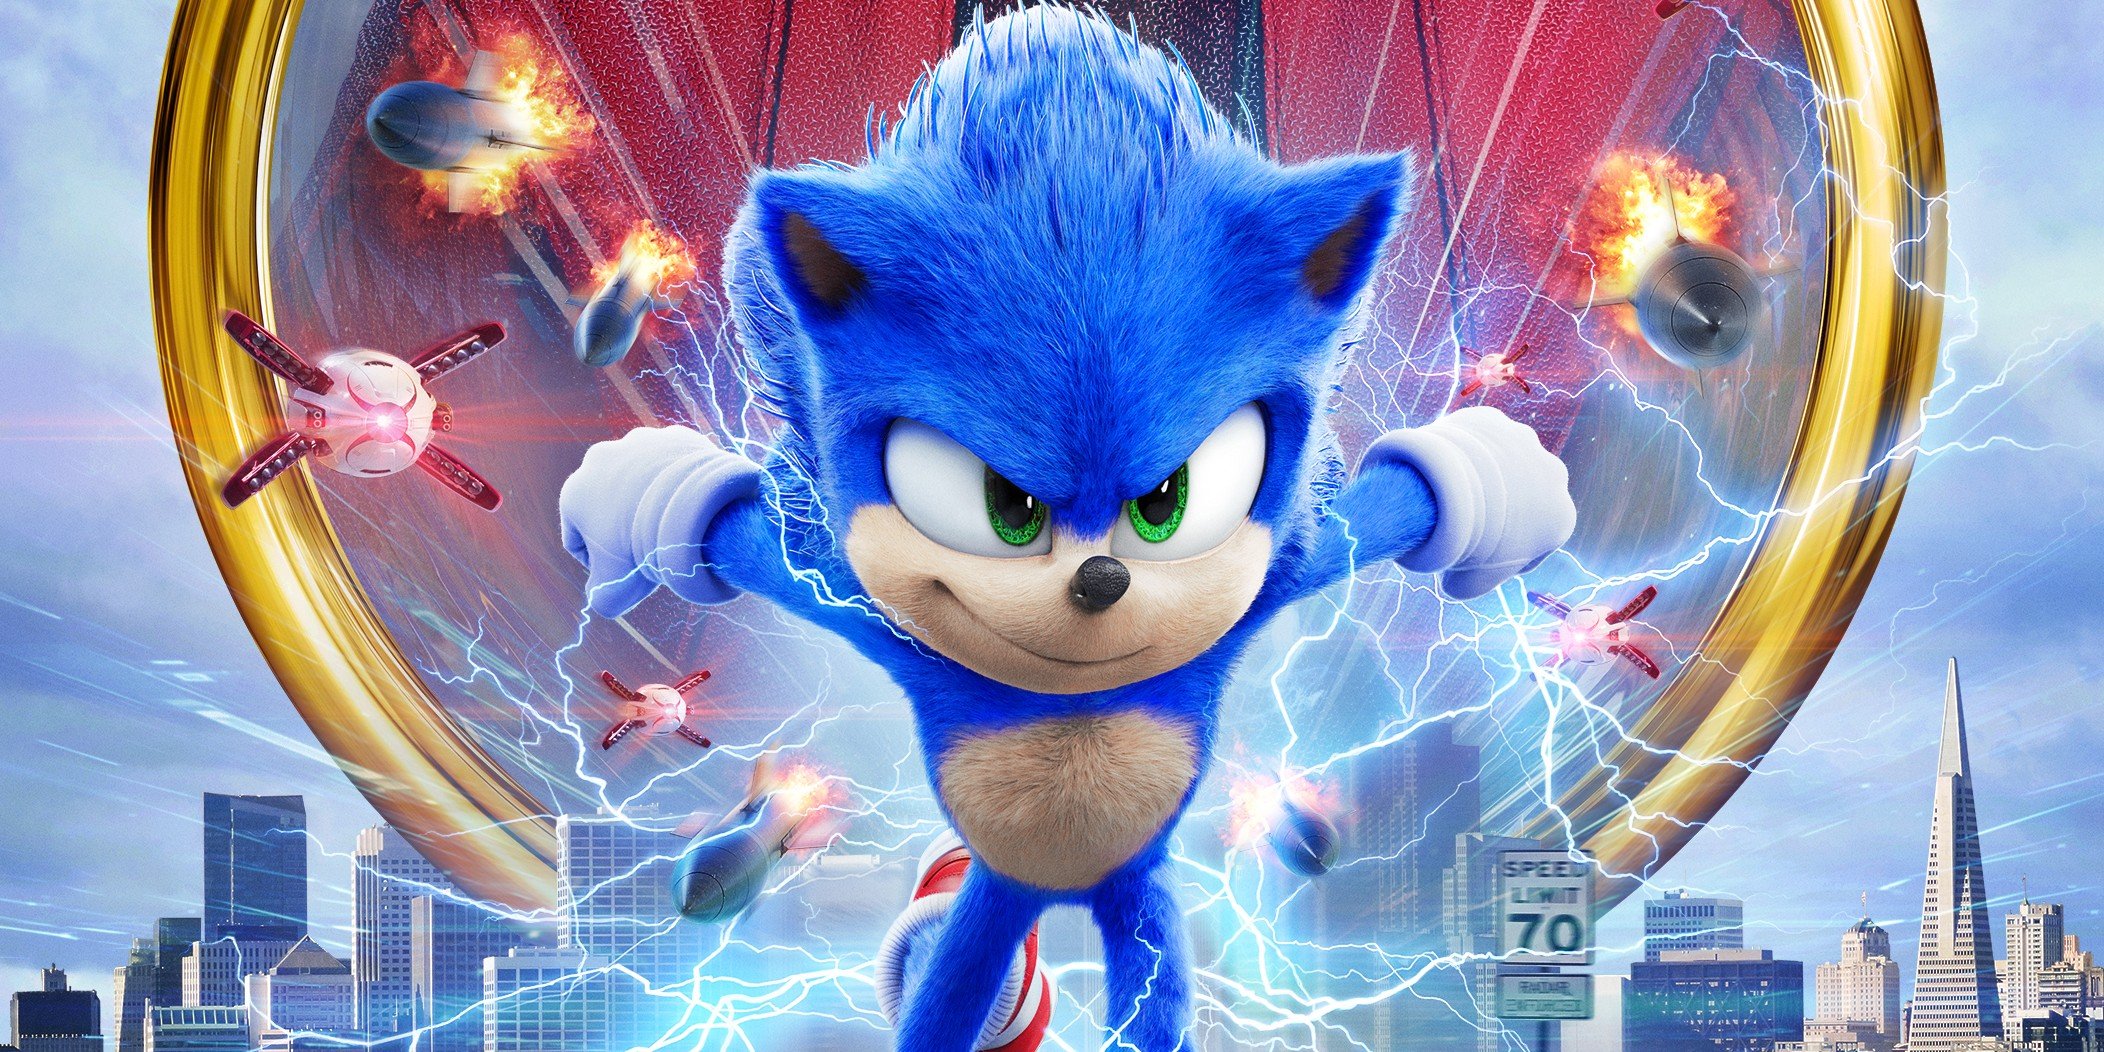 Sonic the Hedgehog review: Loads of fun from beginning to end